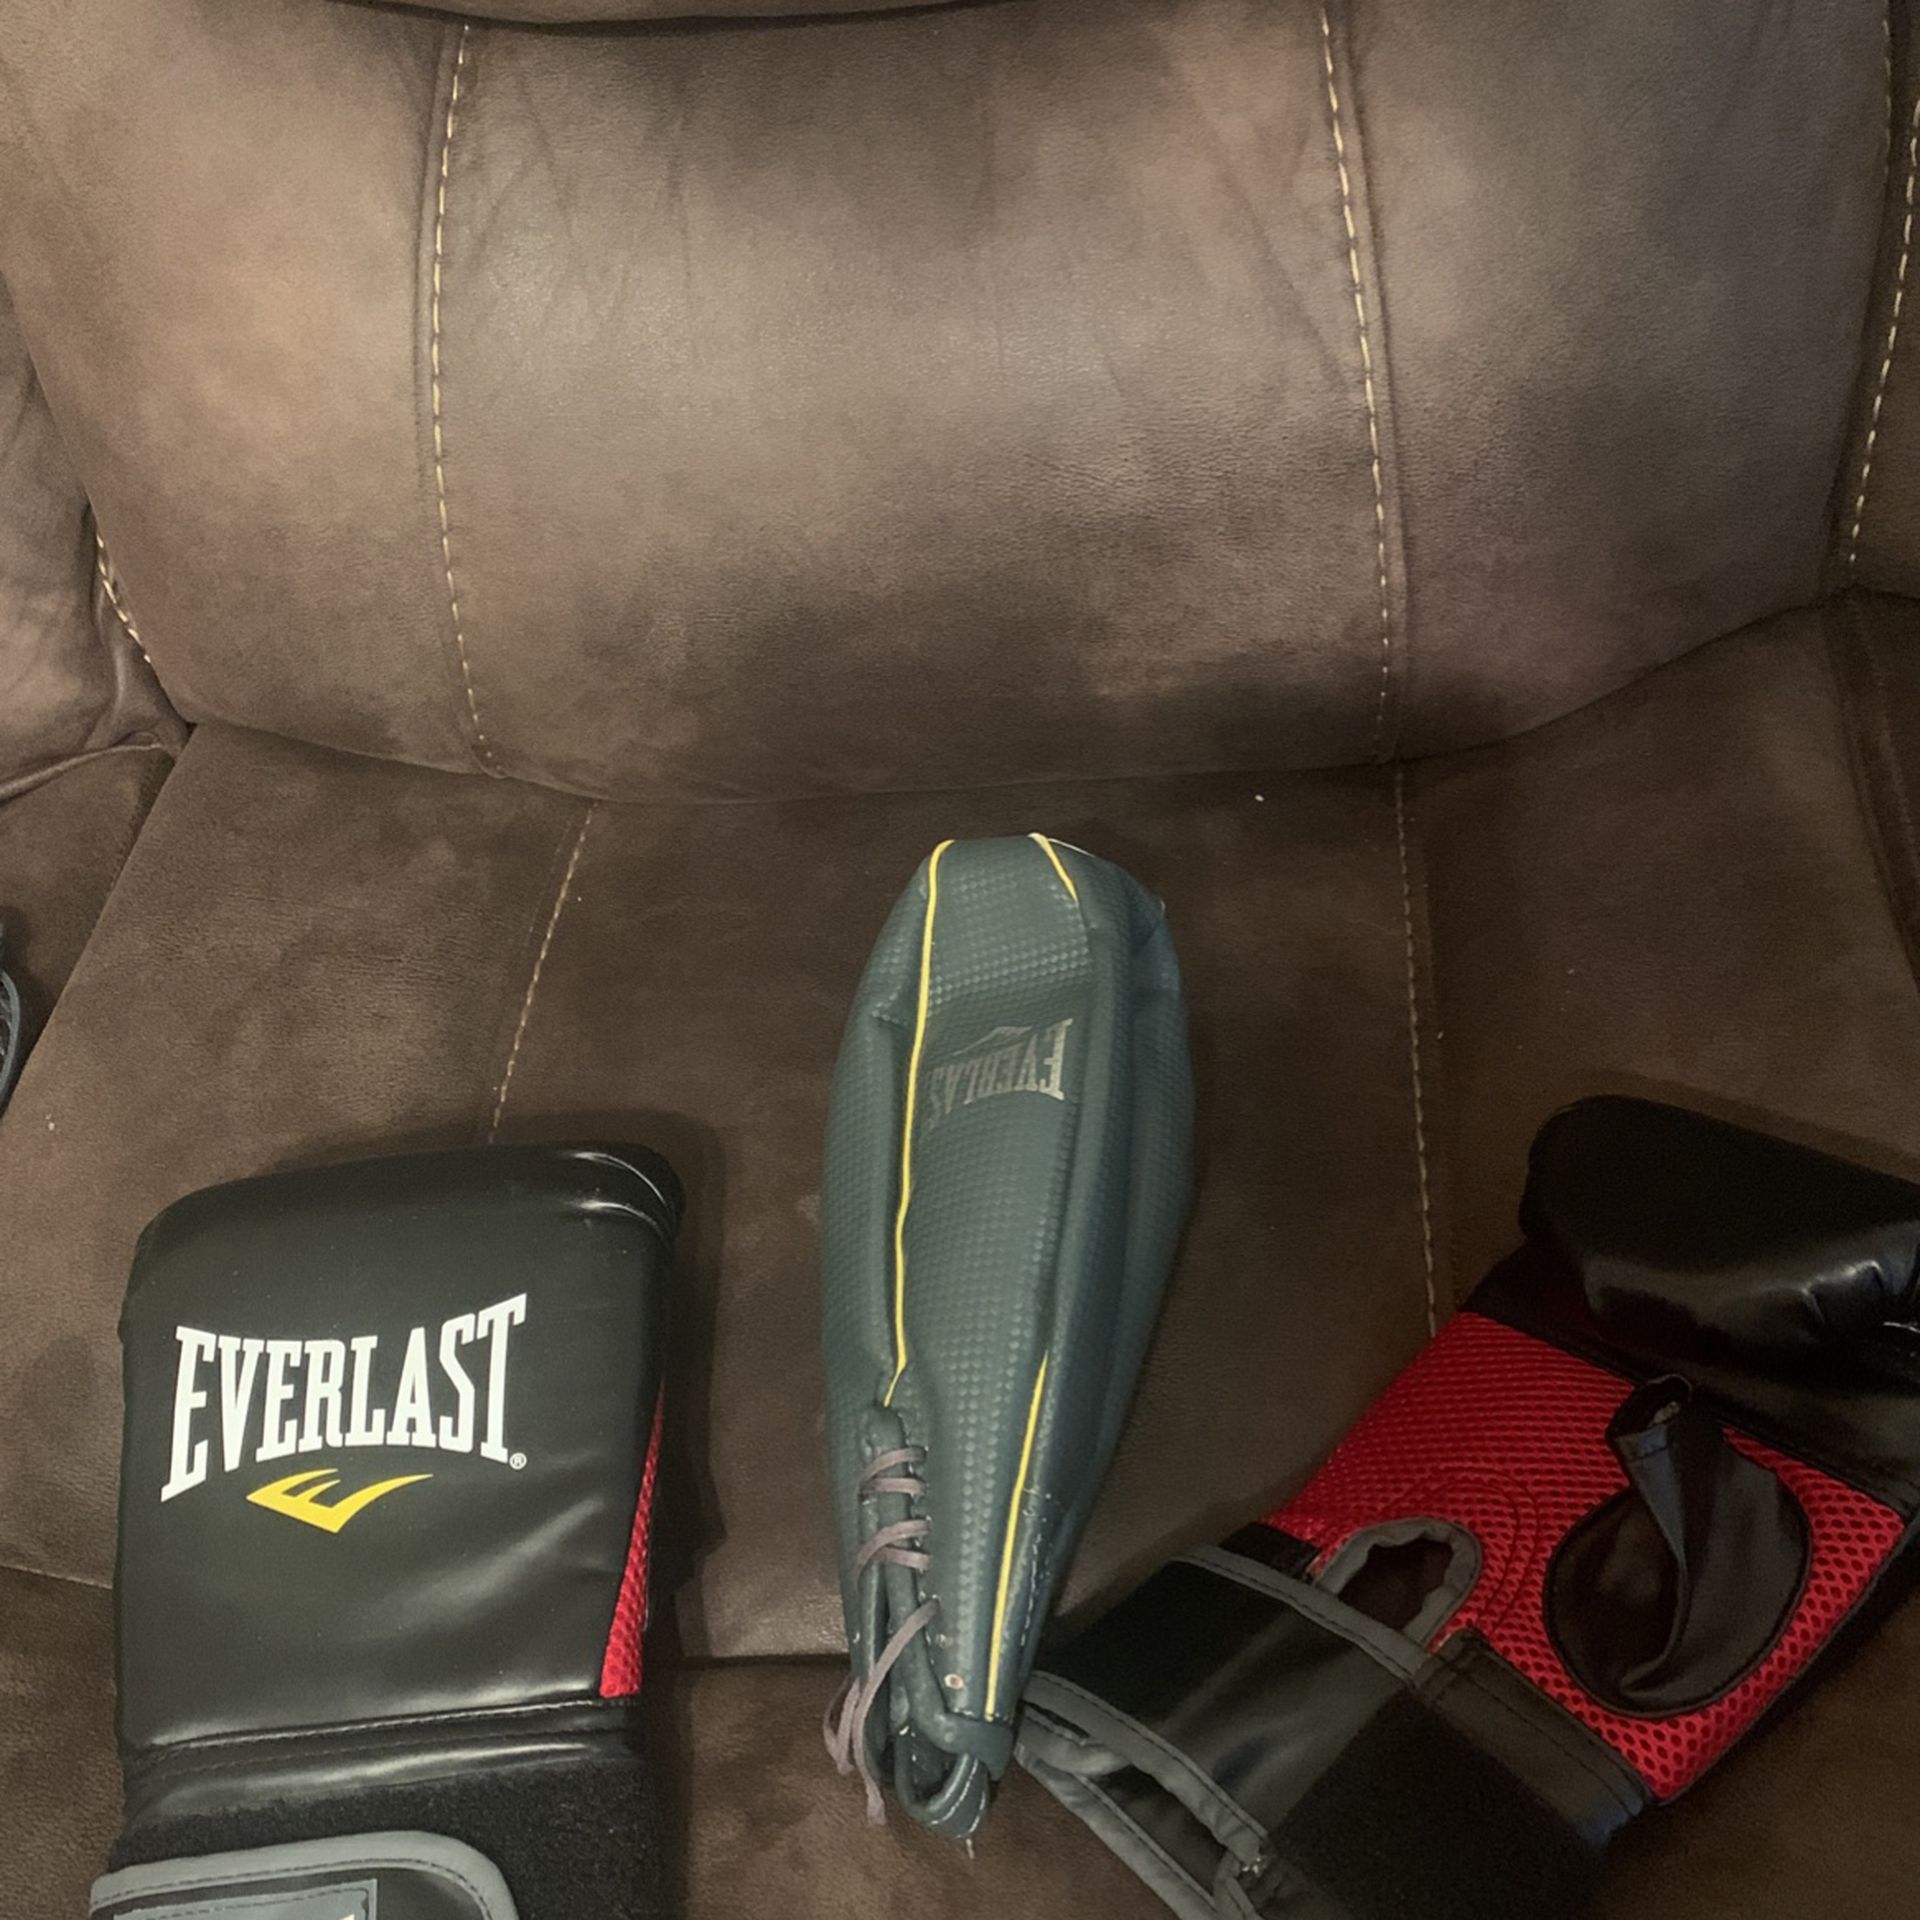 Everlasting Training Gloves With Speed Bag!